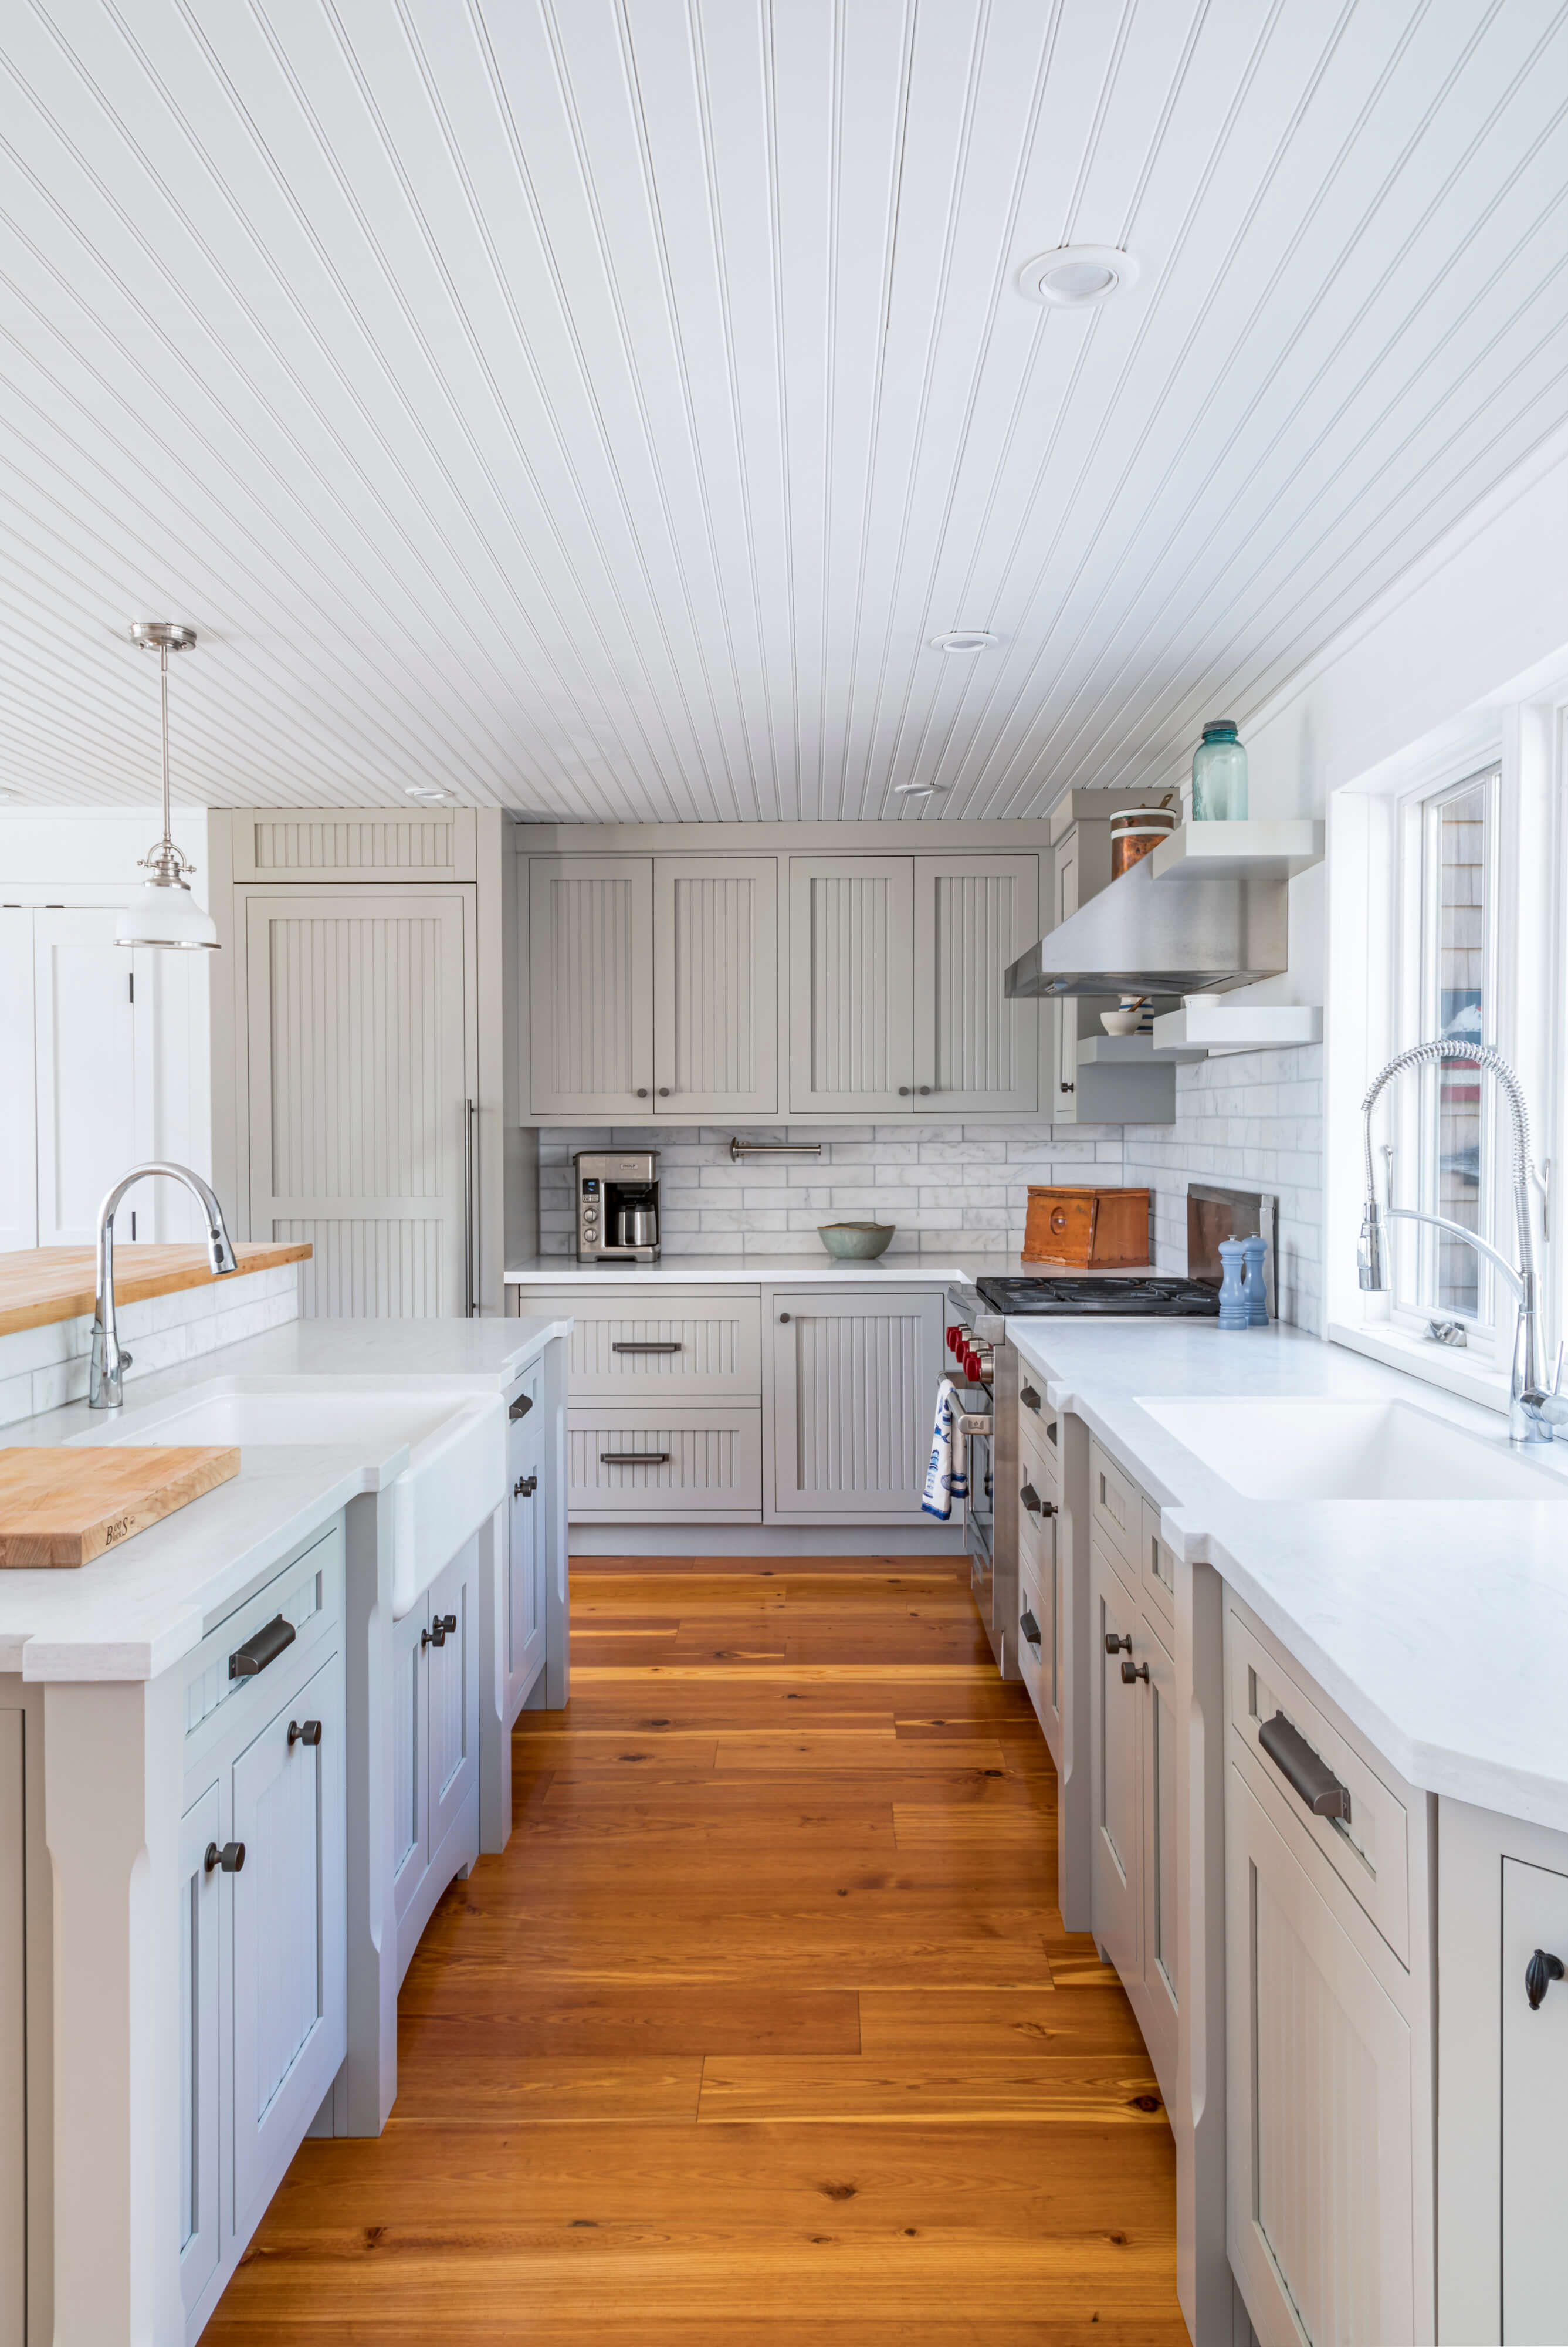 A delightful gray kitchen with cottage styled cabinet doors and a shiplap ceiling.